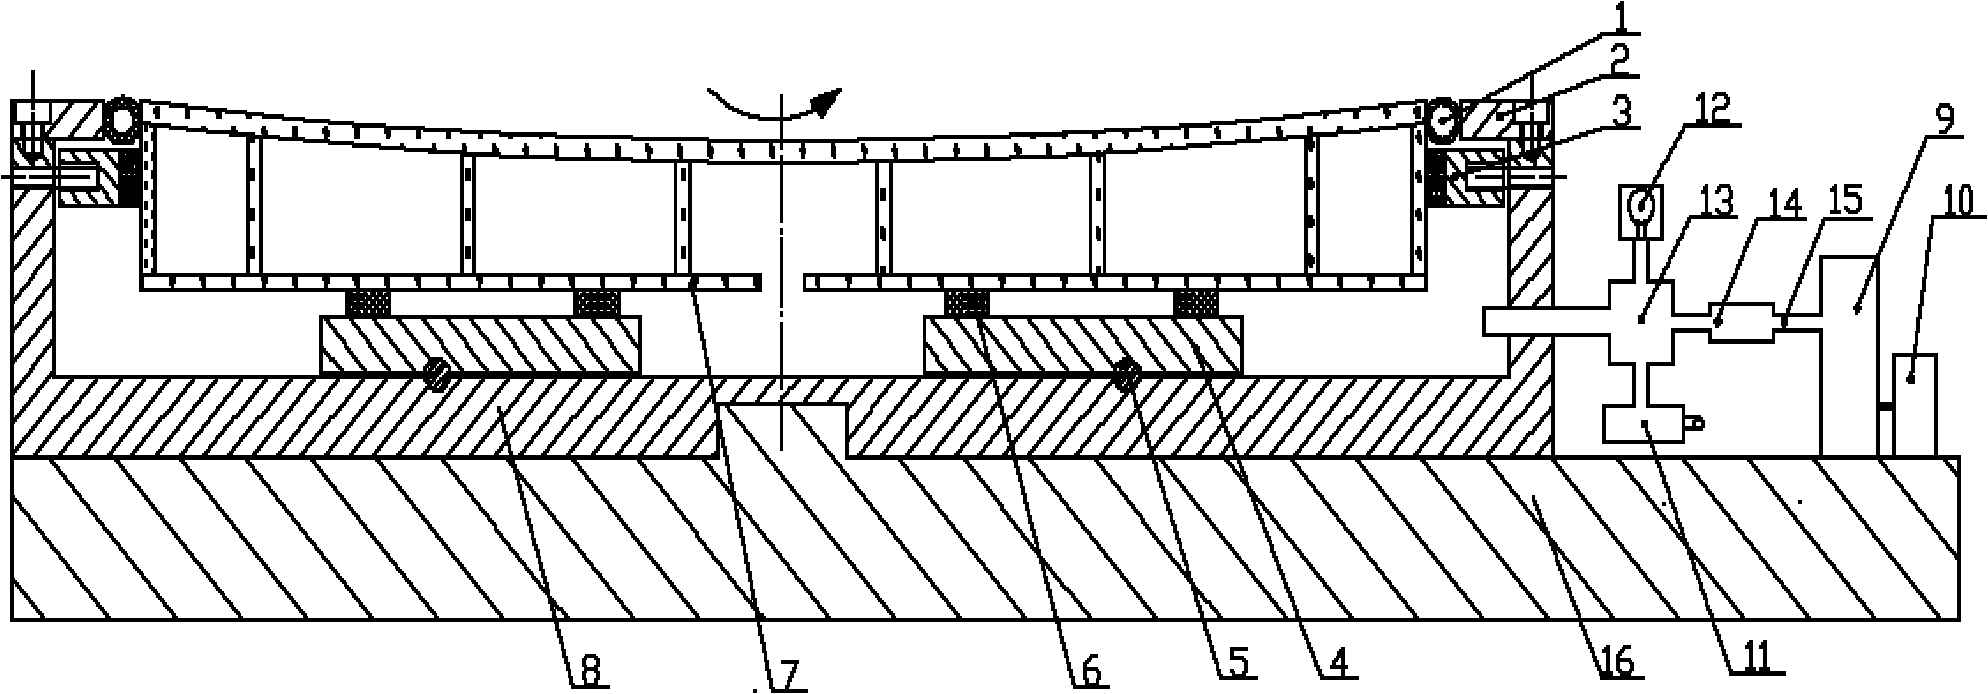 Polishing device for eliminating coining effect of lightweight reflecting mirror